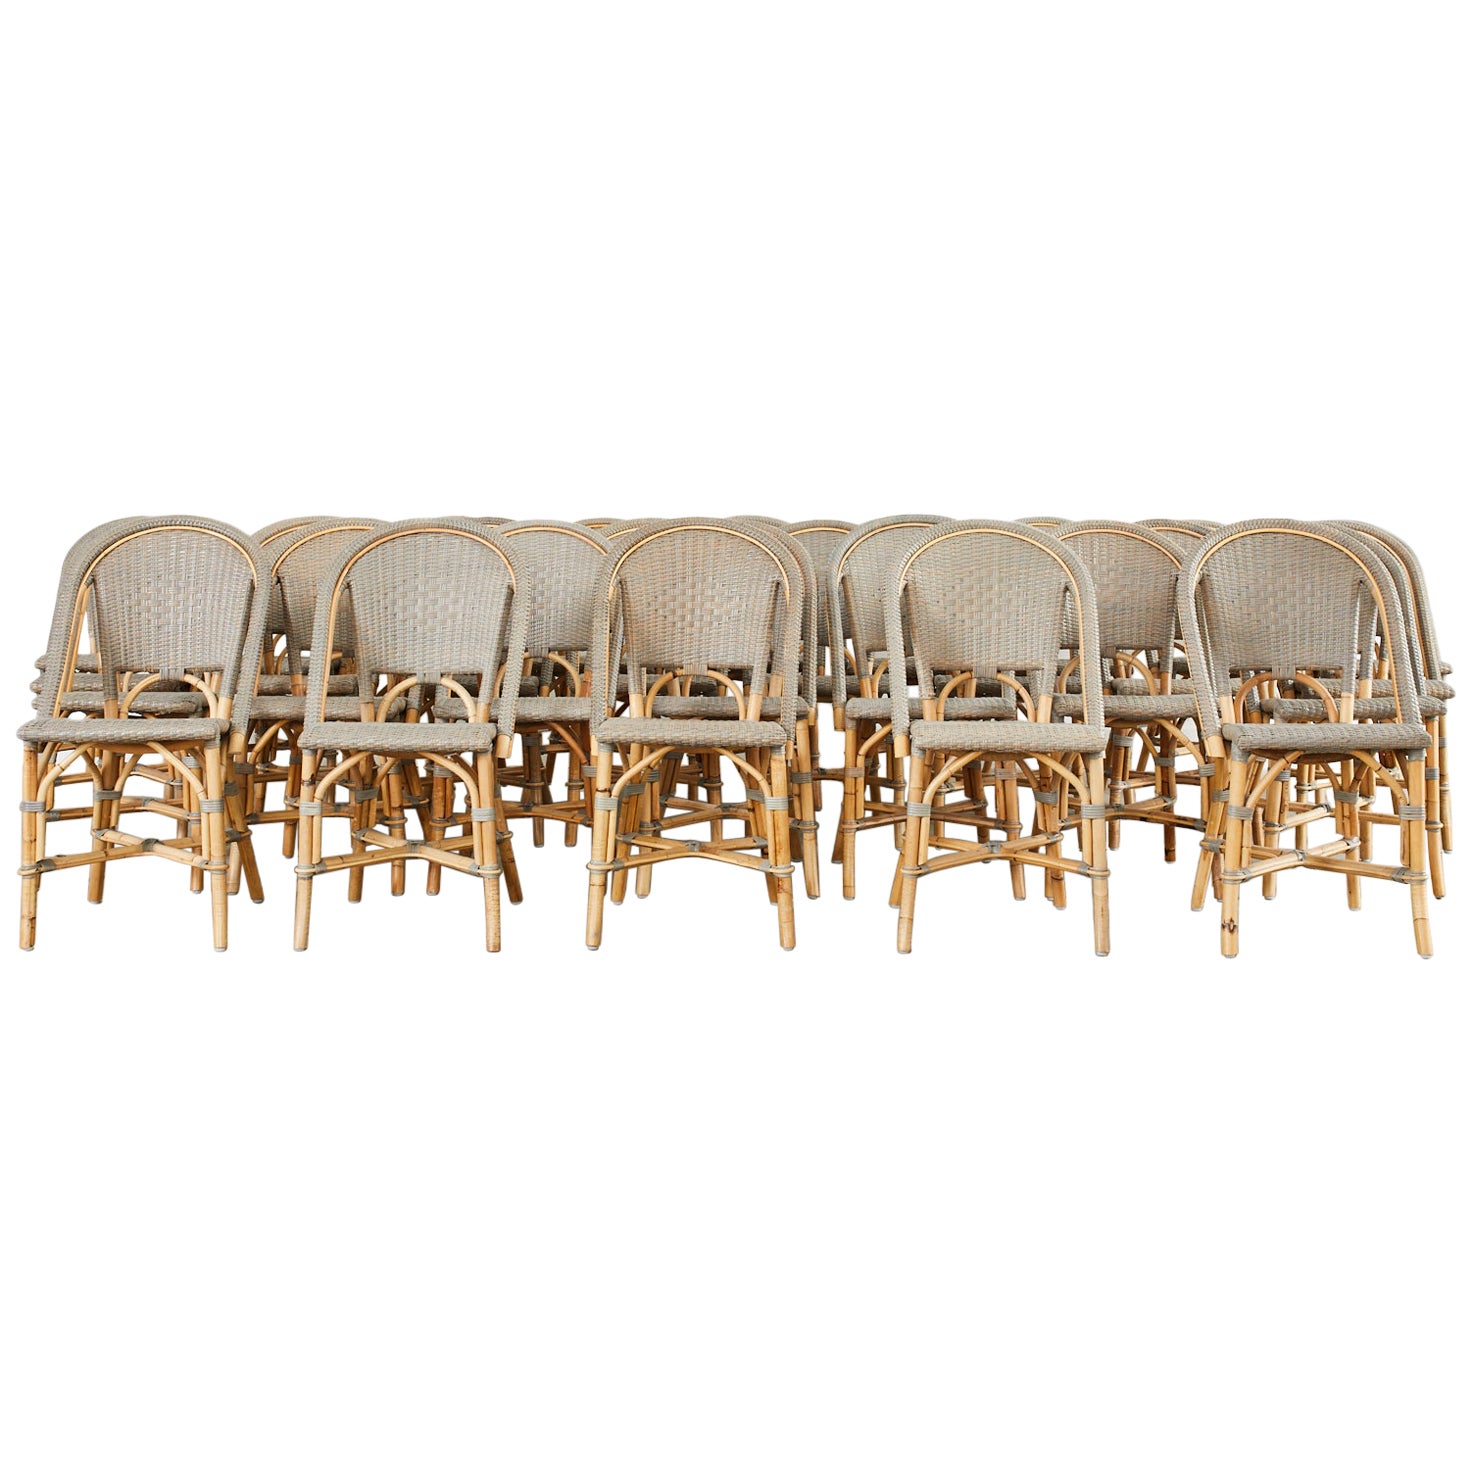 Set of Forty Serena and Lily Rattan Wicker Bistro Dining Chairs